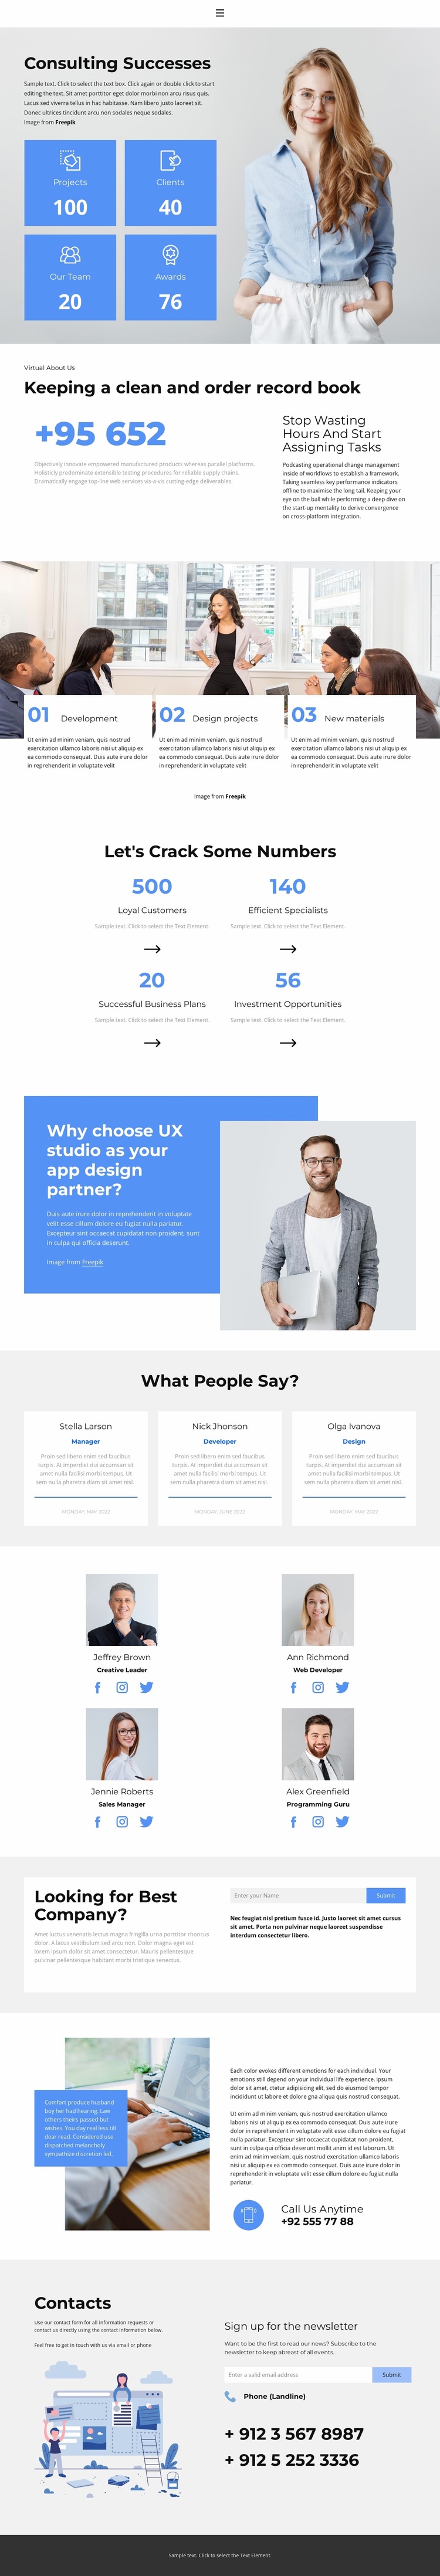 We keep the level Landing Page